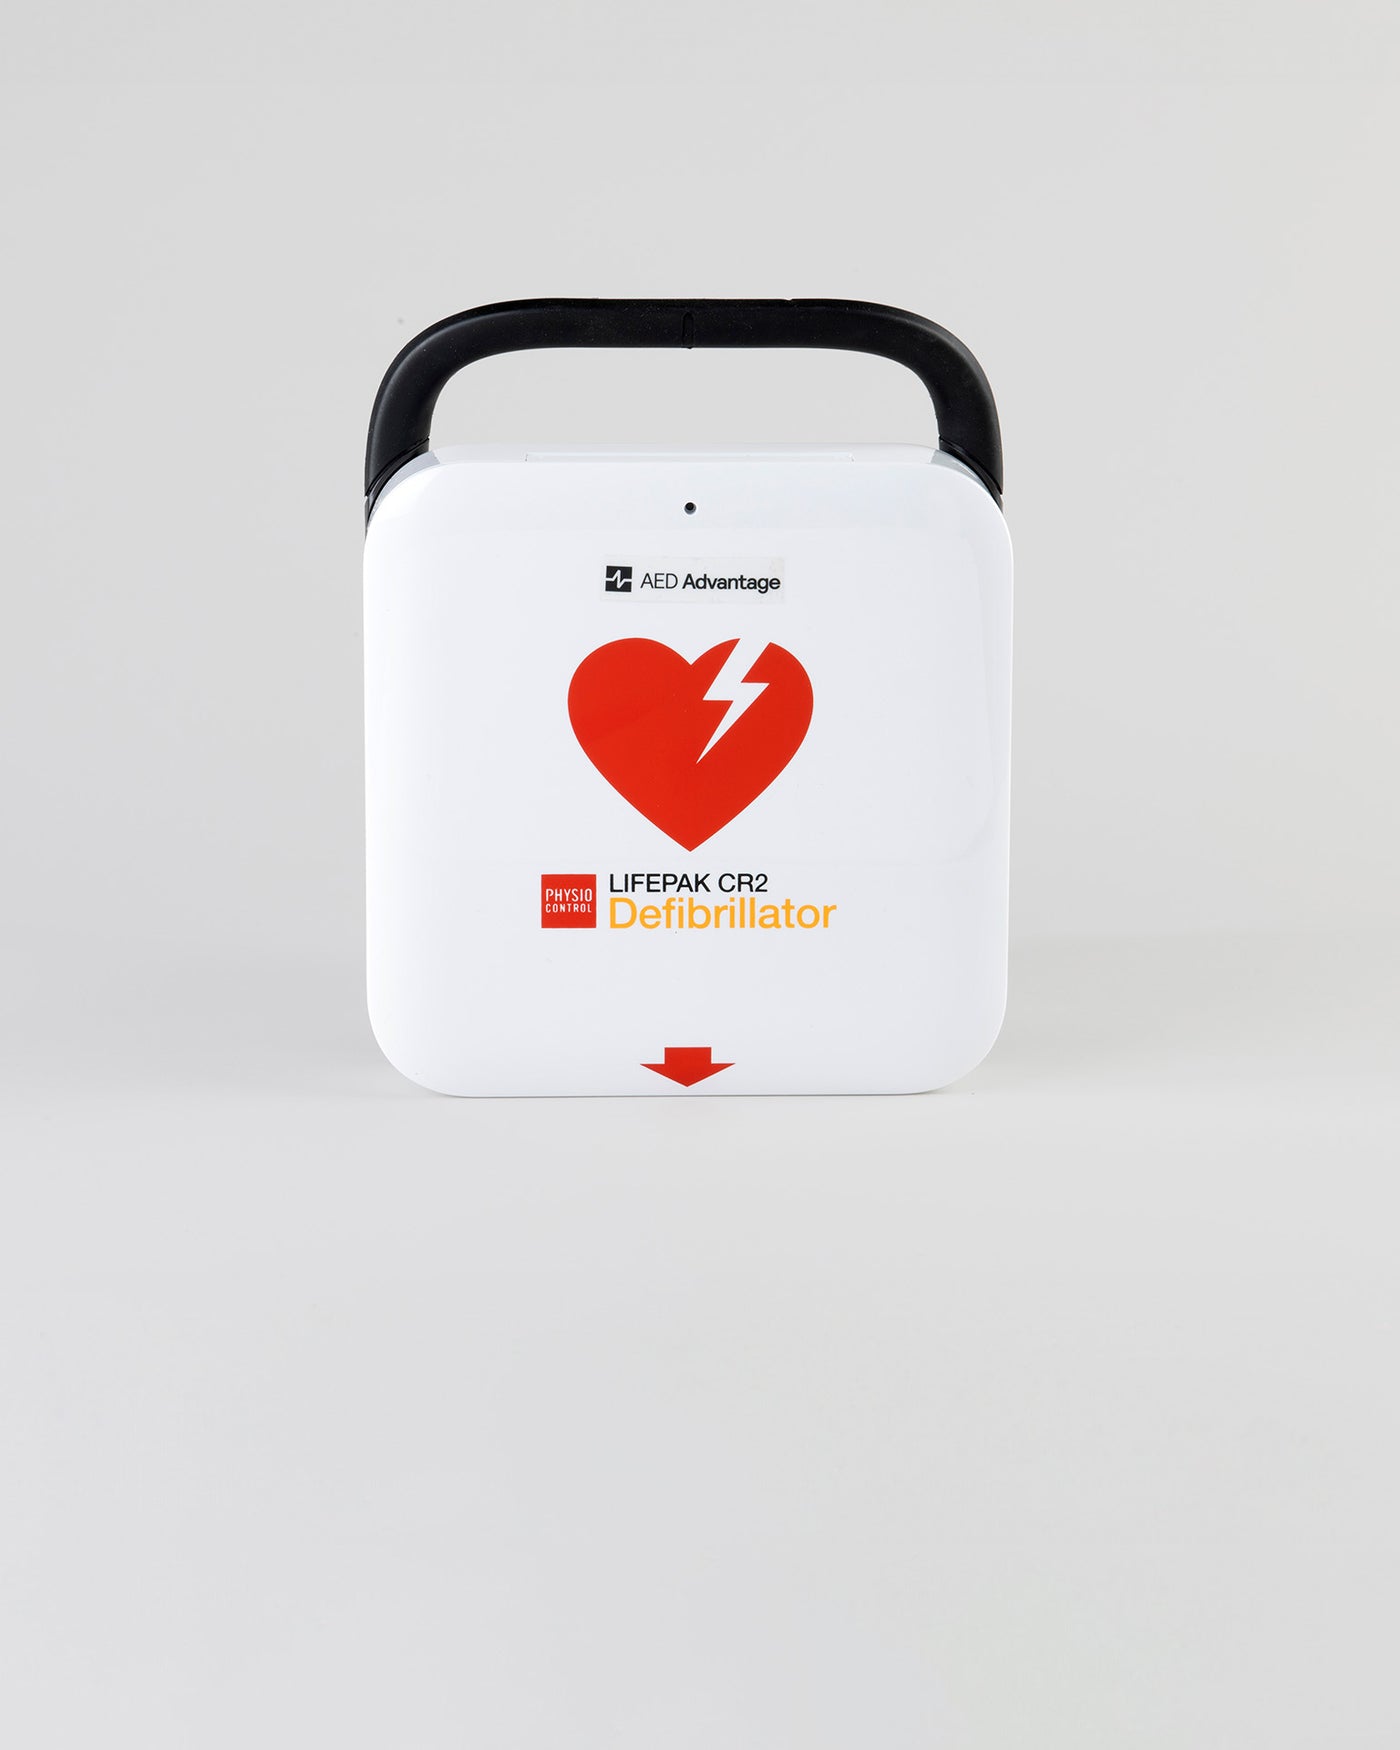 A white and red LIFEPAK CR2 AED with a black carry handle